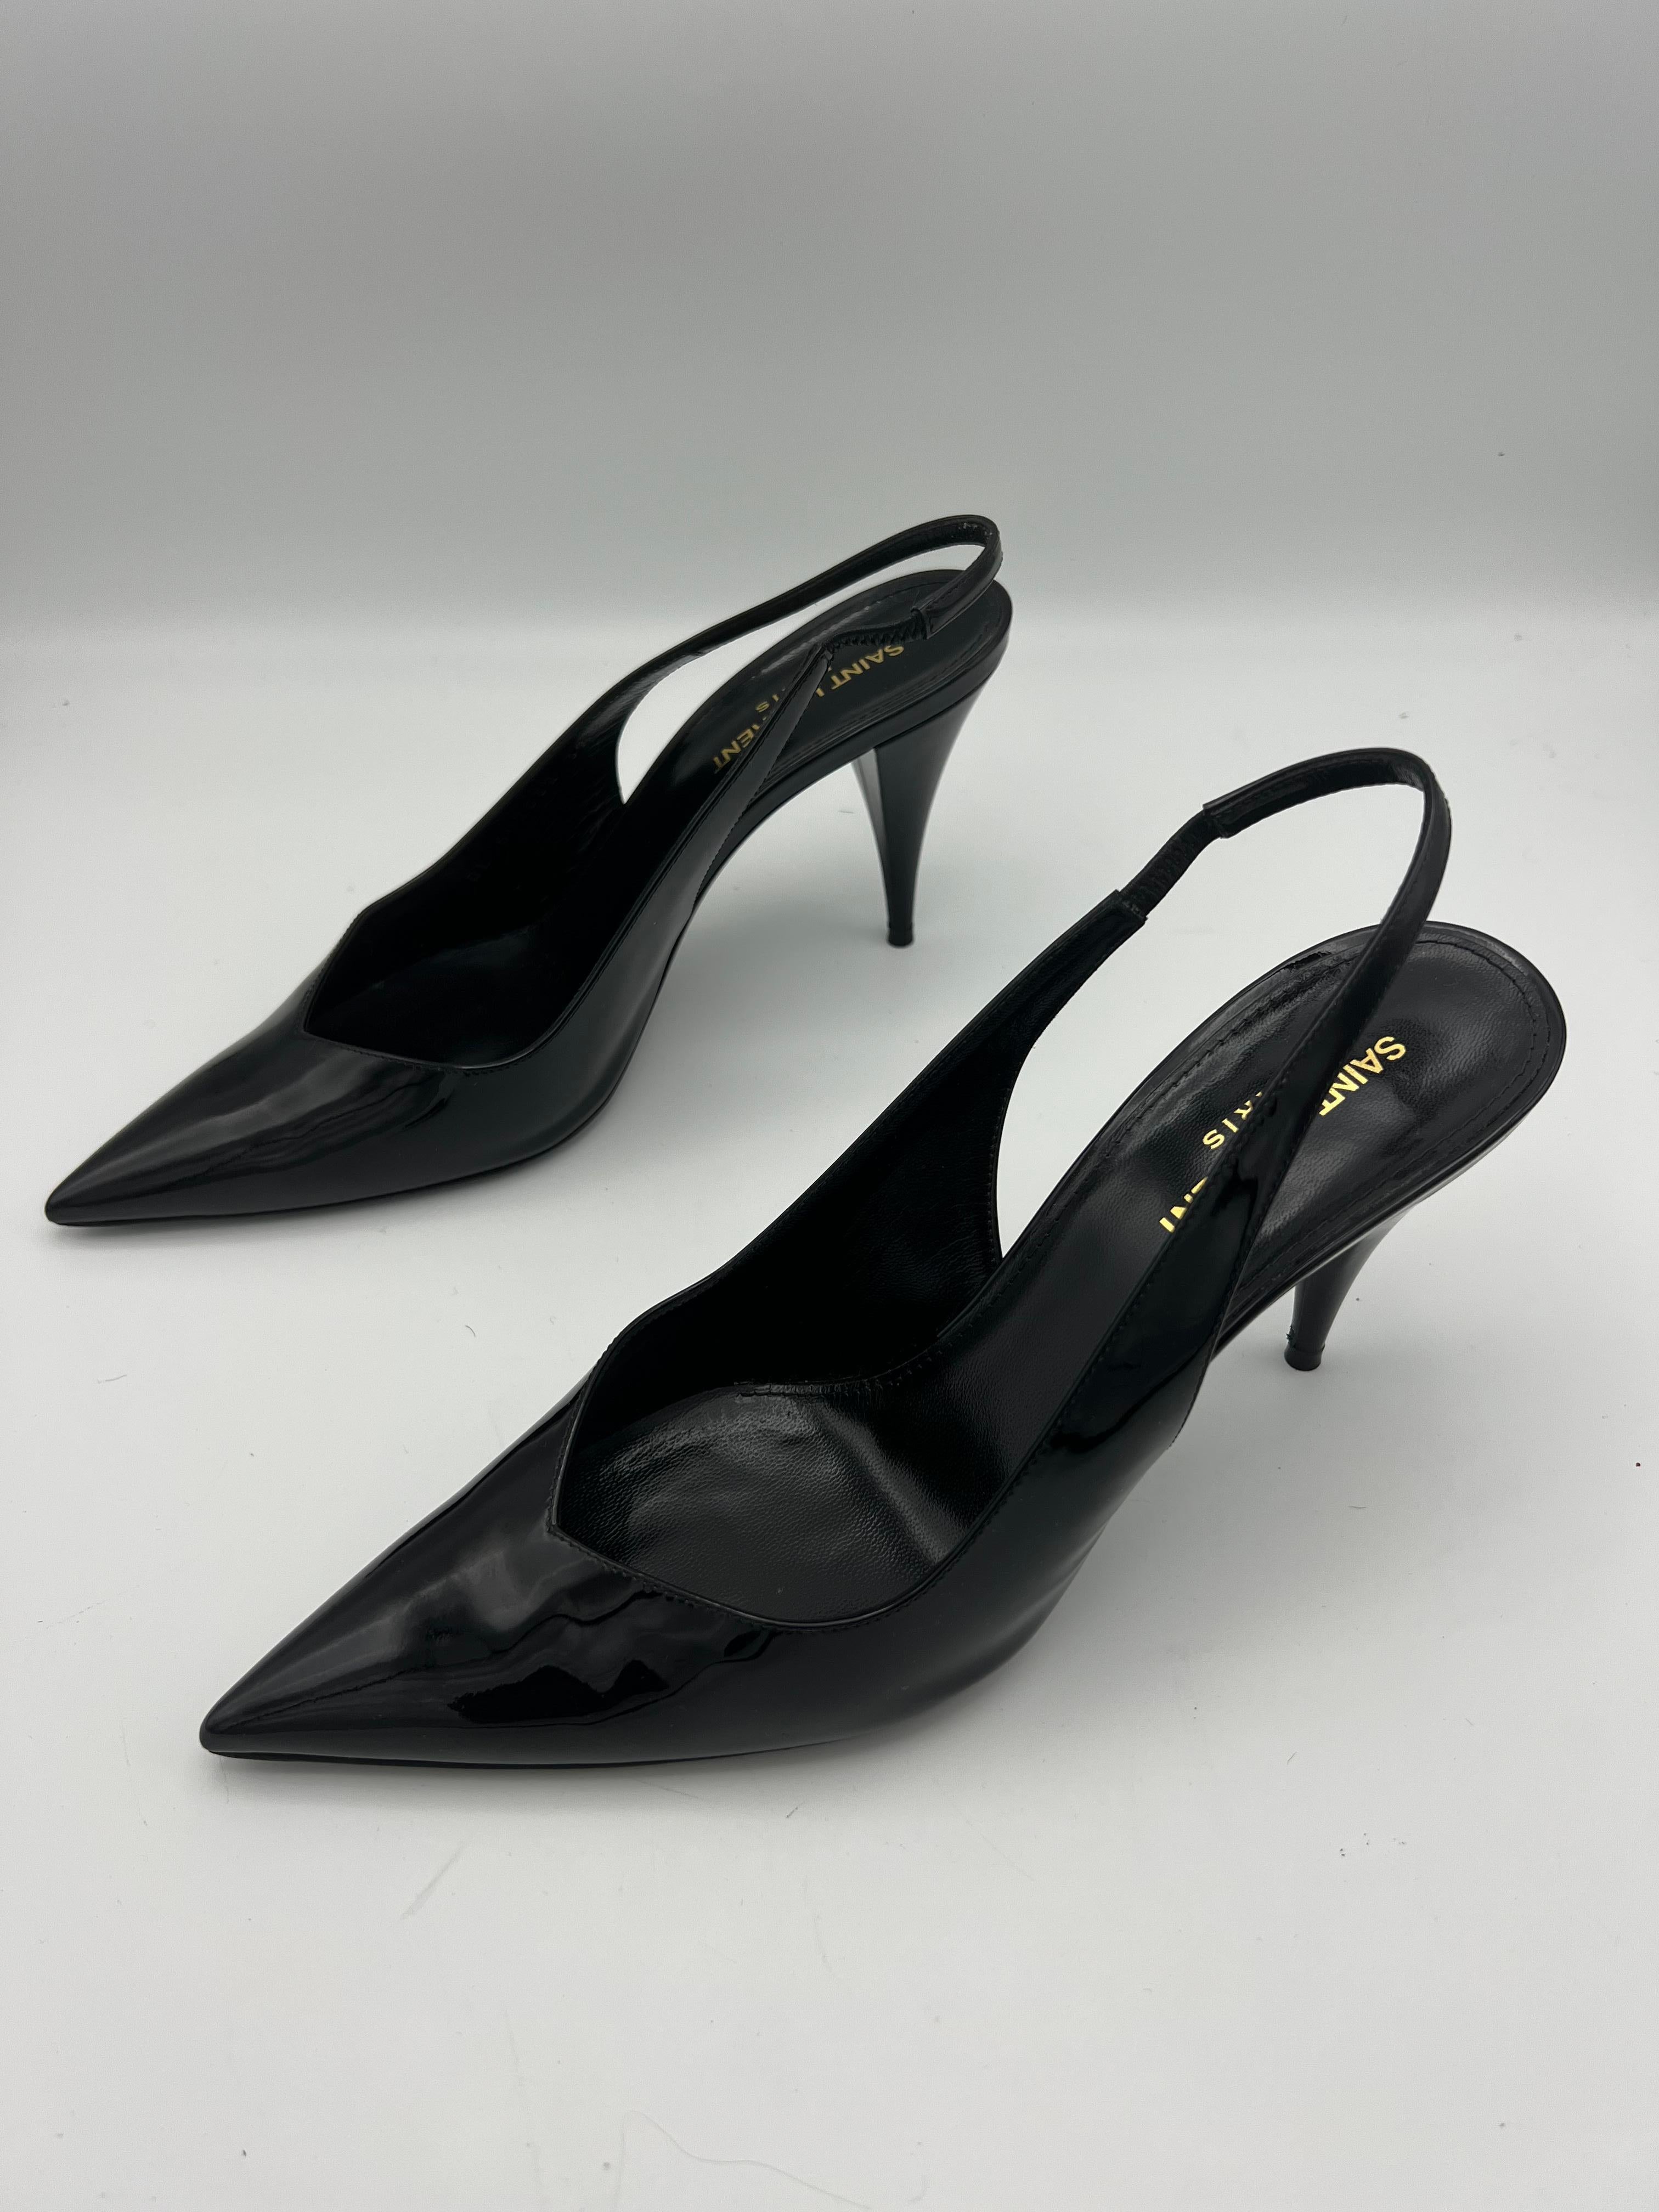 Product details:

The shoes feature pointed toe and slingback strap style. Heel height is 4”. Made in Italy.